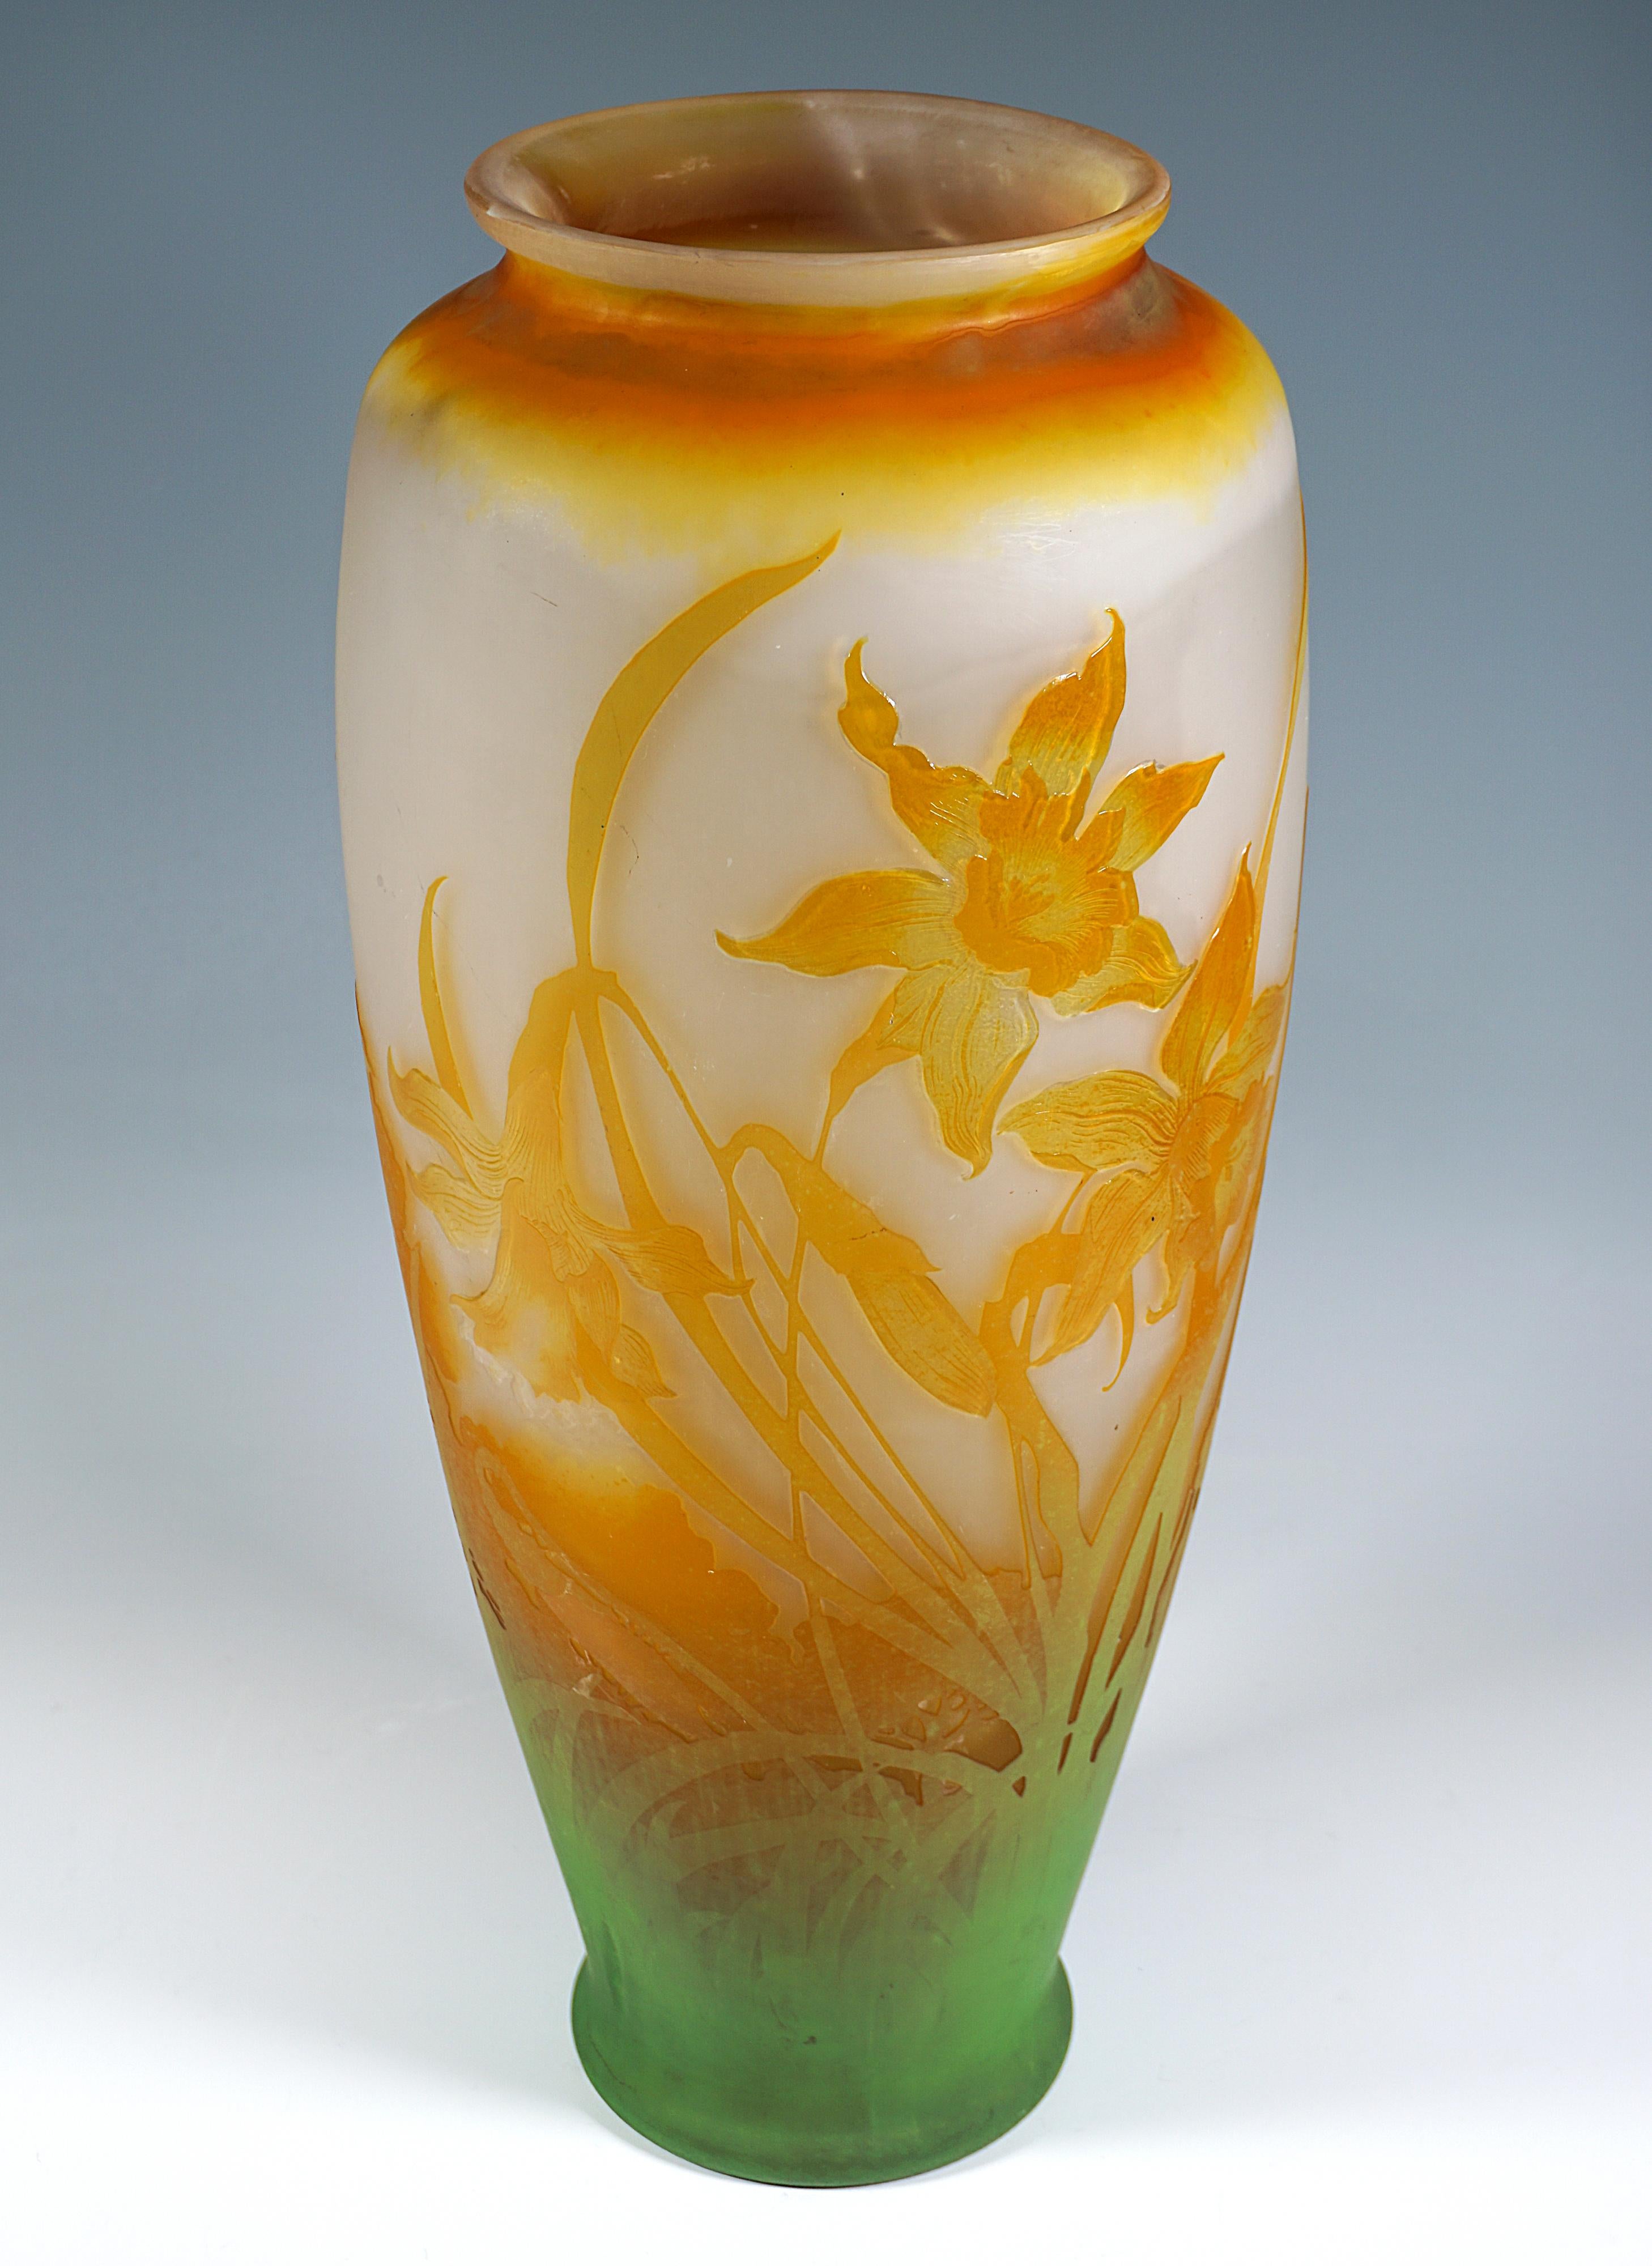 Large Émile Gallé Art Nouveau Cameo Vase With Daffodil Decor, France, Ca 1904 In Good Condition For Sale In Vienna, AT